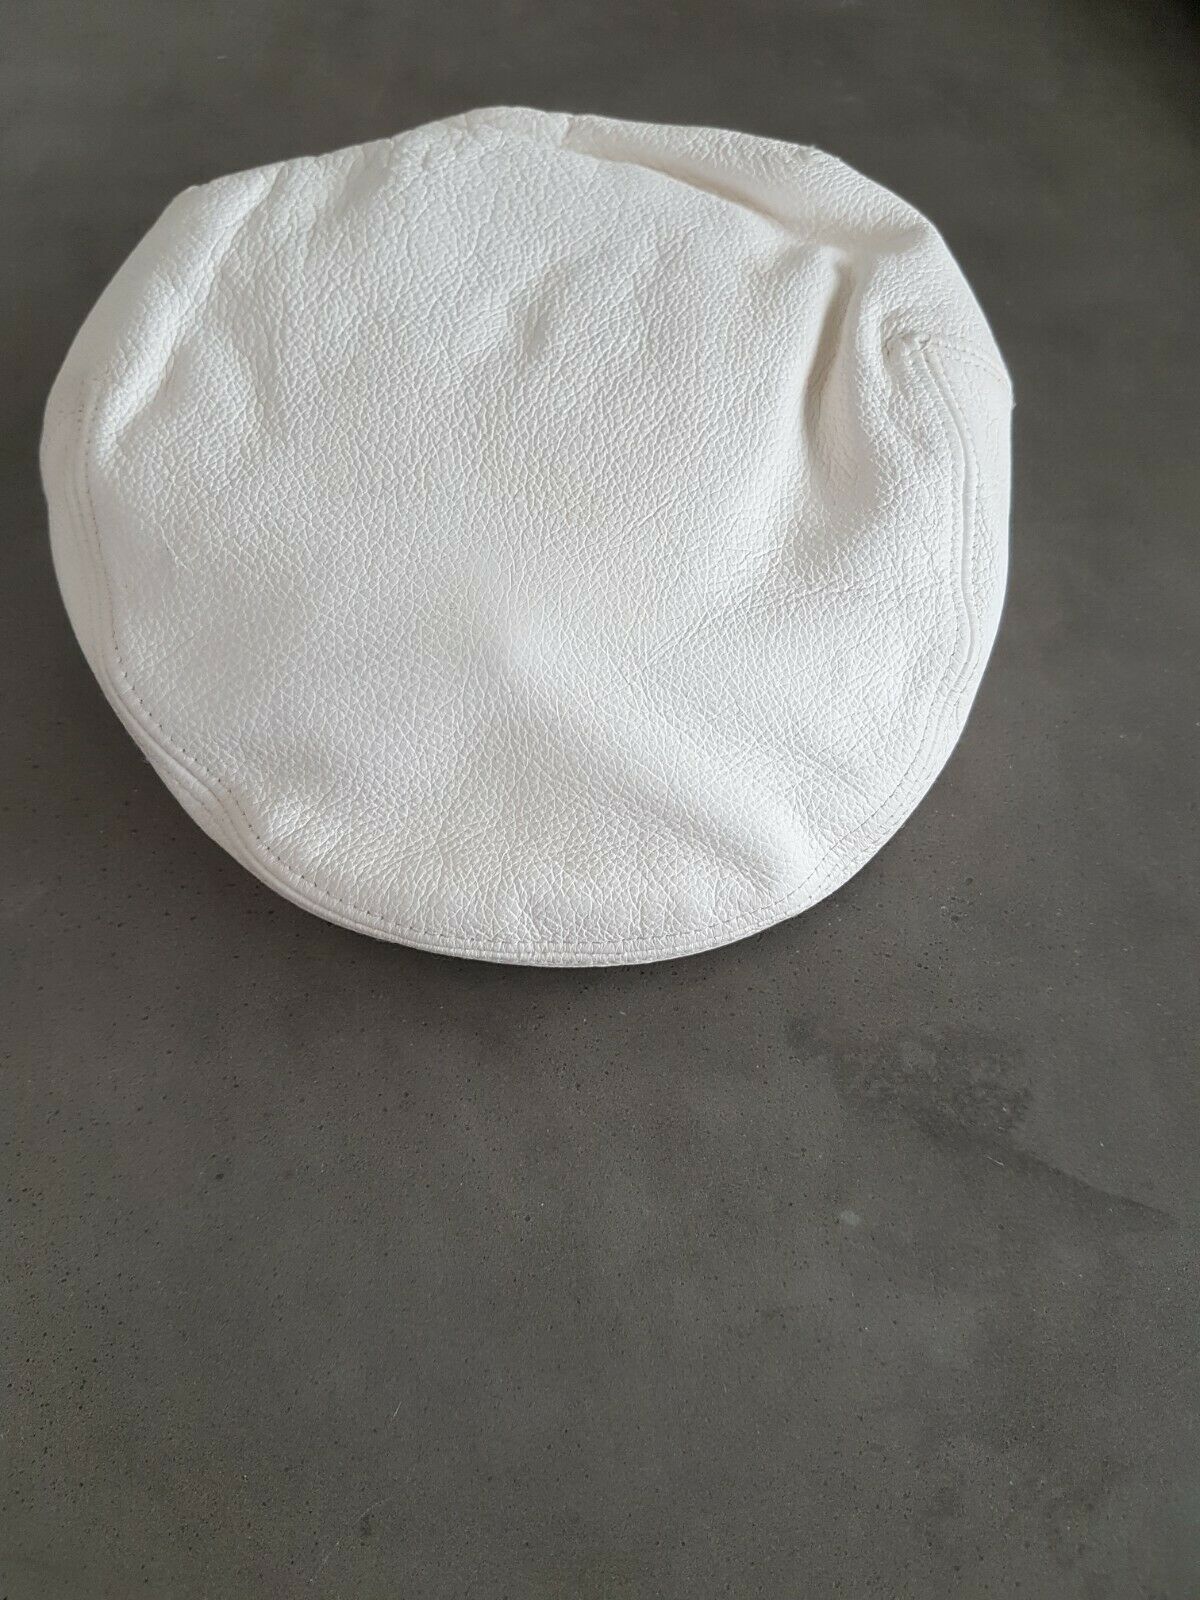 Mary J Blige Used and Worn White Leather Barney's Newsboy Cap